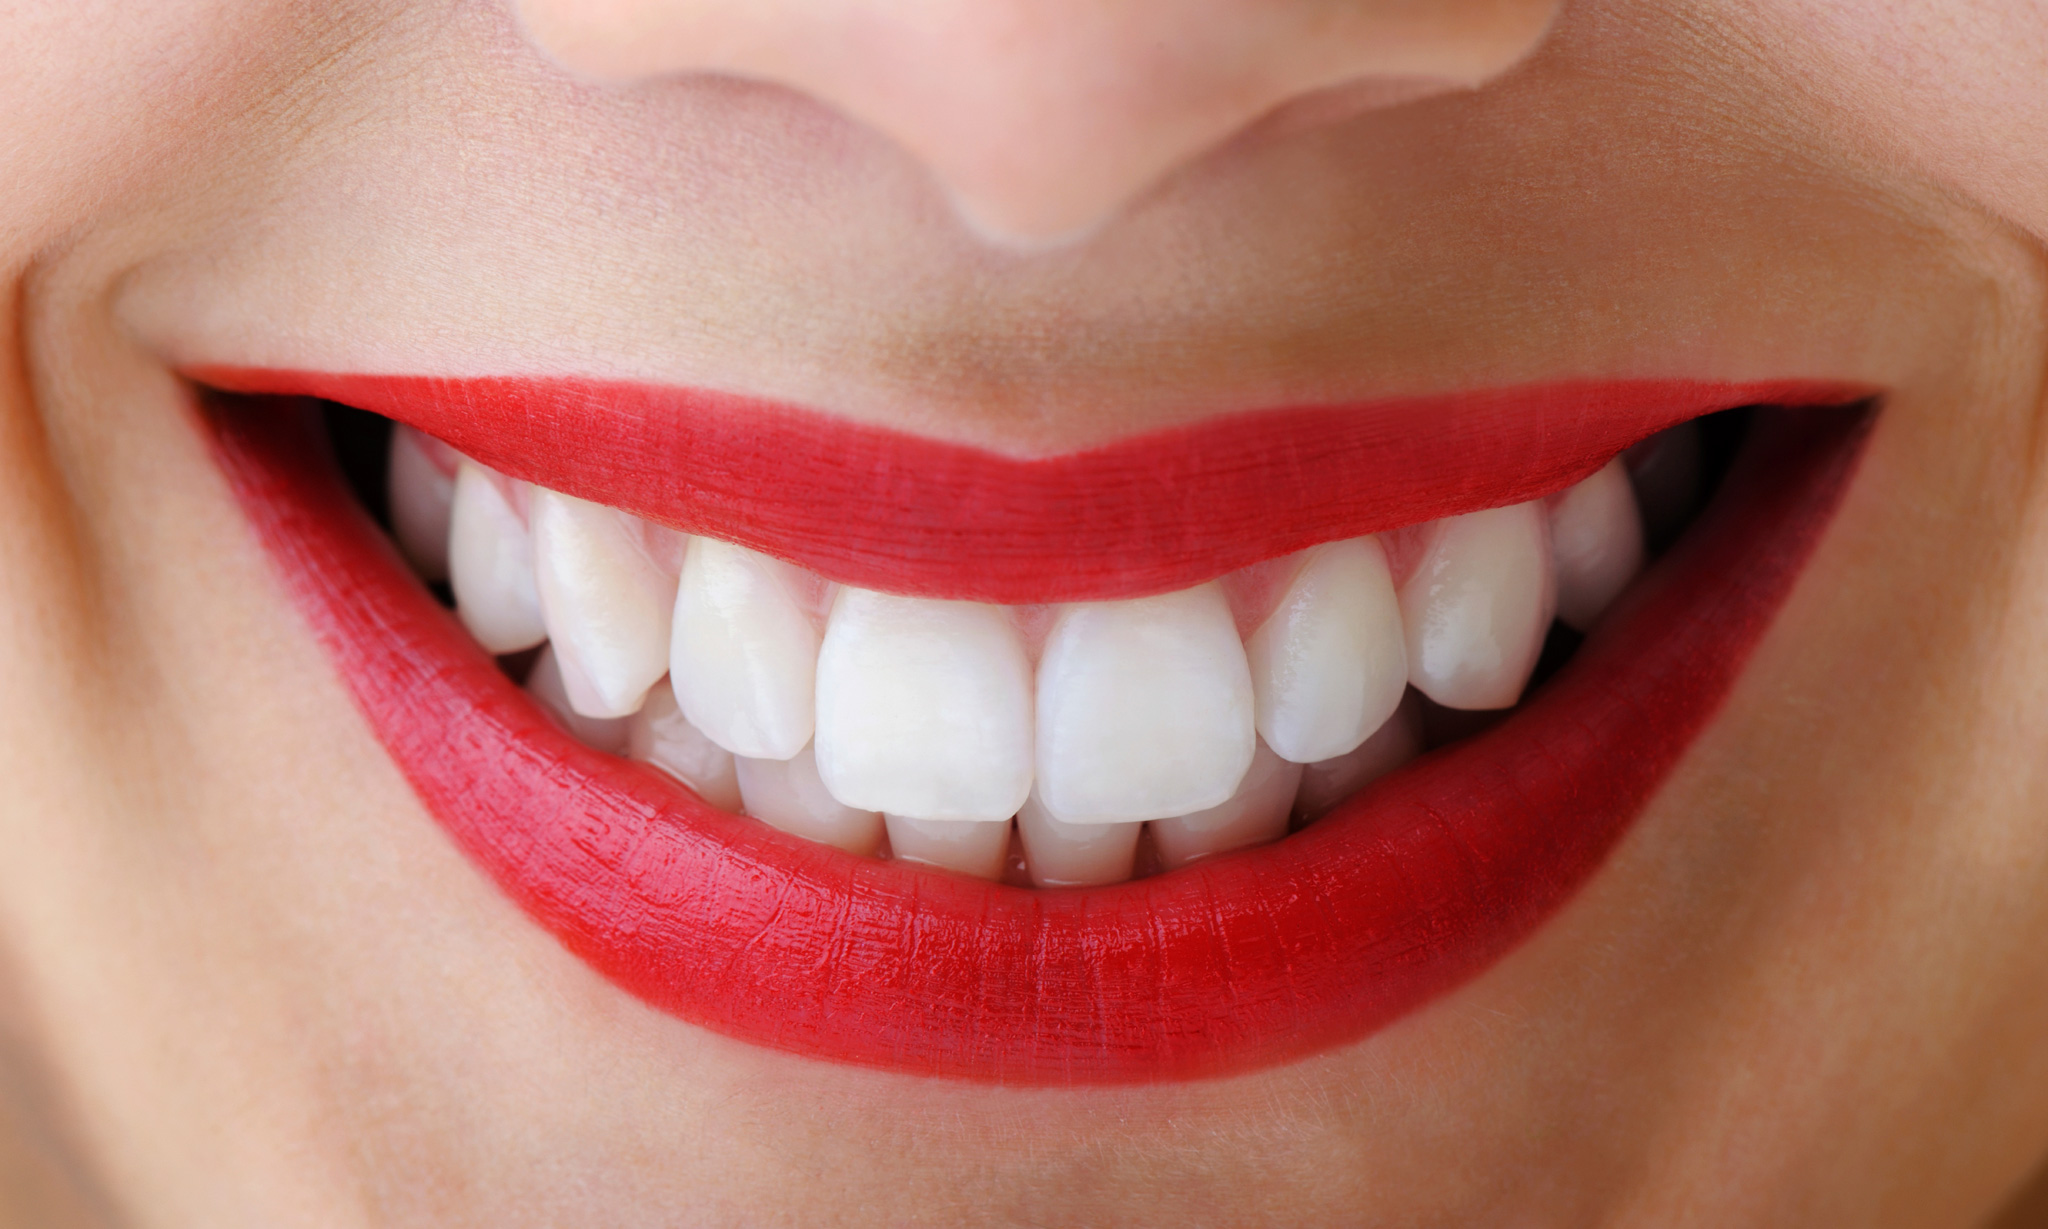 We are the experts when it comes to teeth whitening here in Sydney.